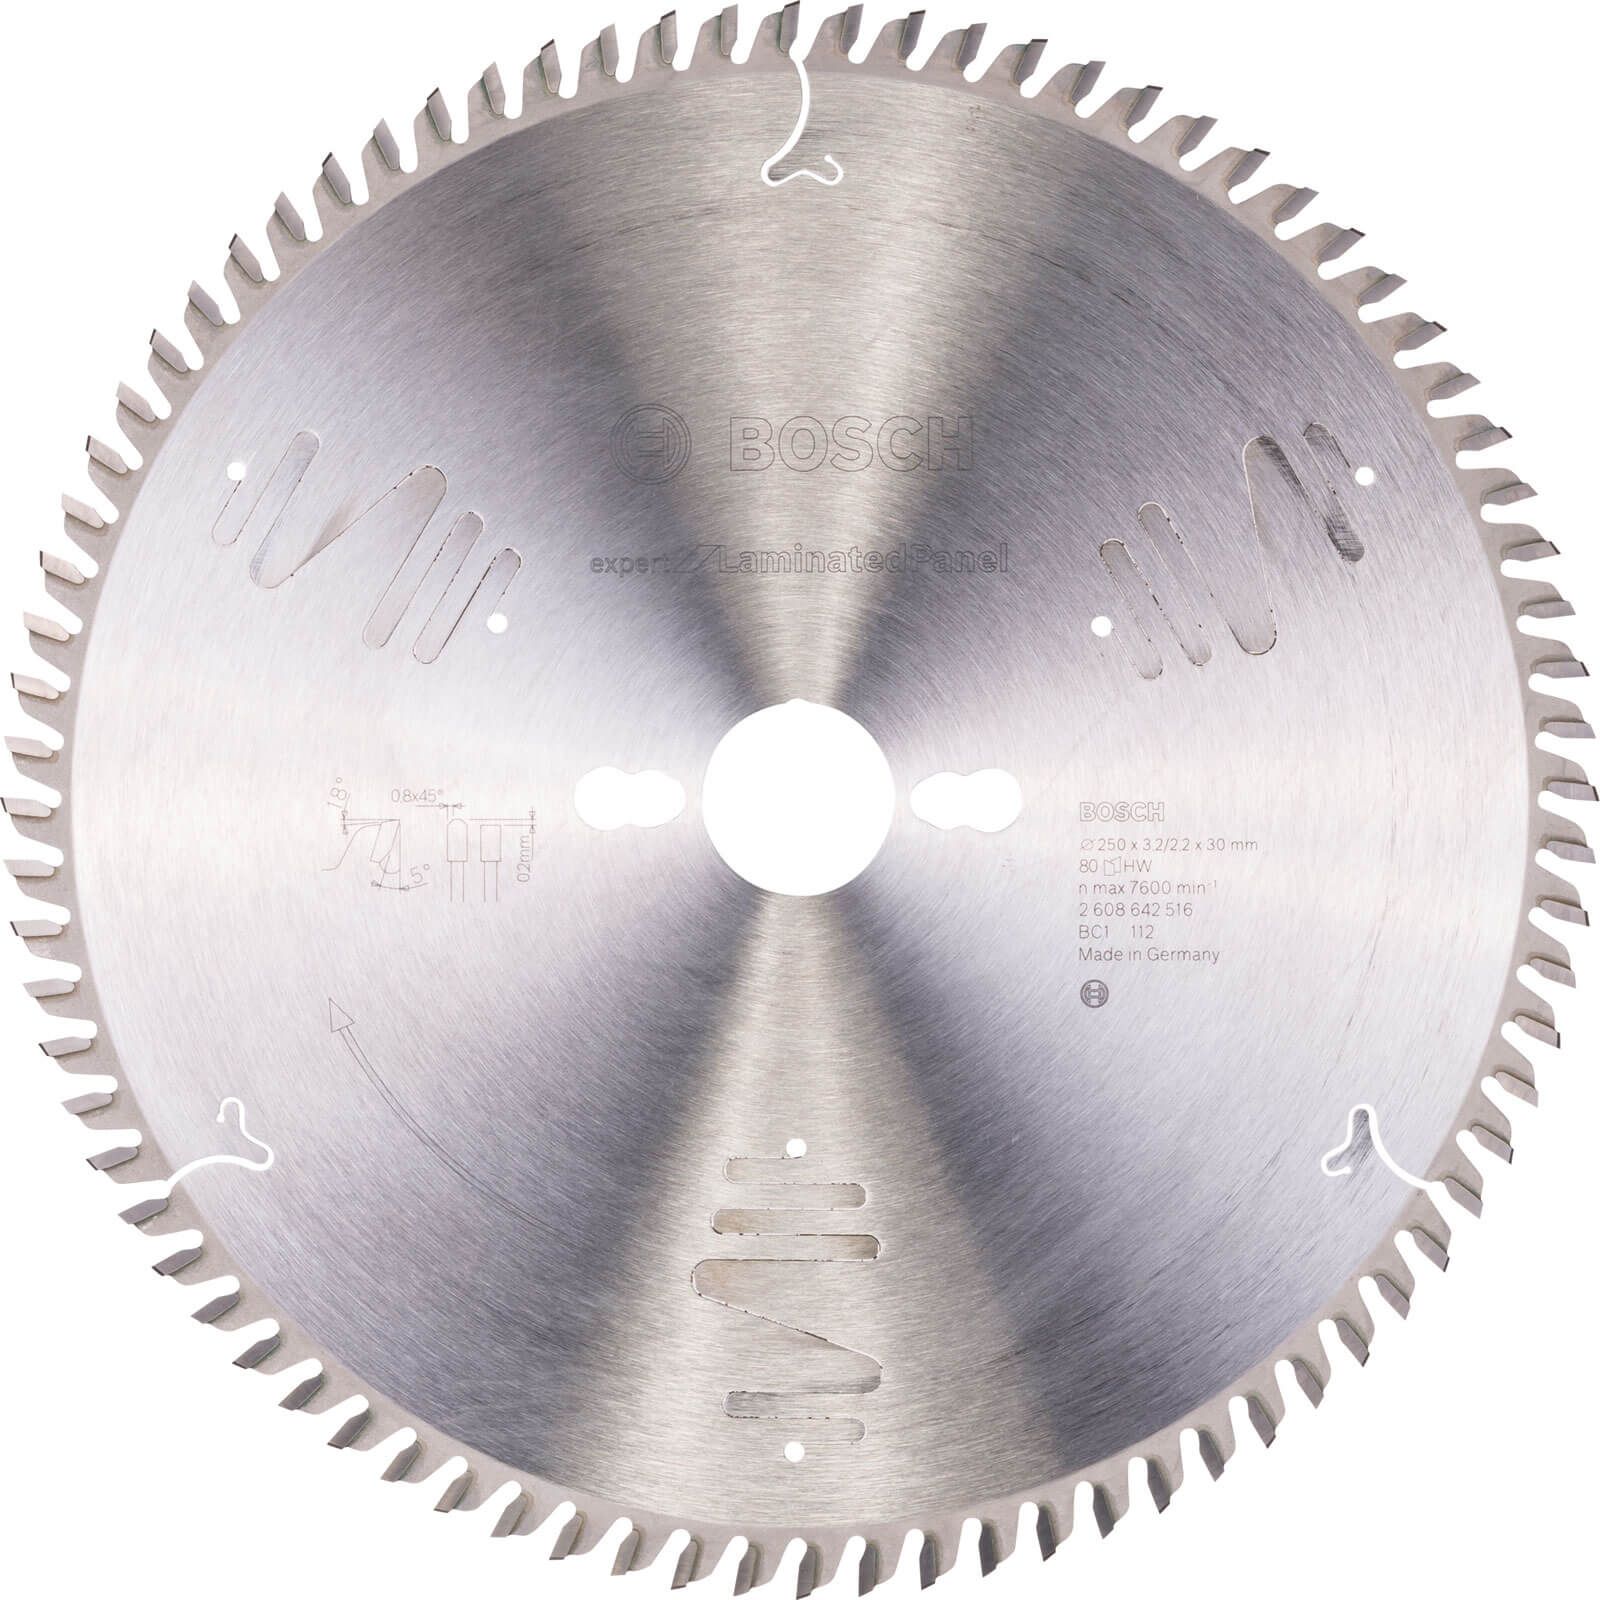 Bosch Expert Fine Cut Table Saw Blade for Laminated Panel 250mm 80T 30mm